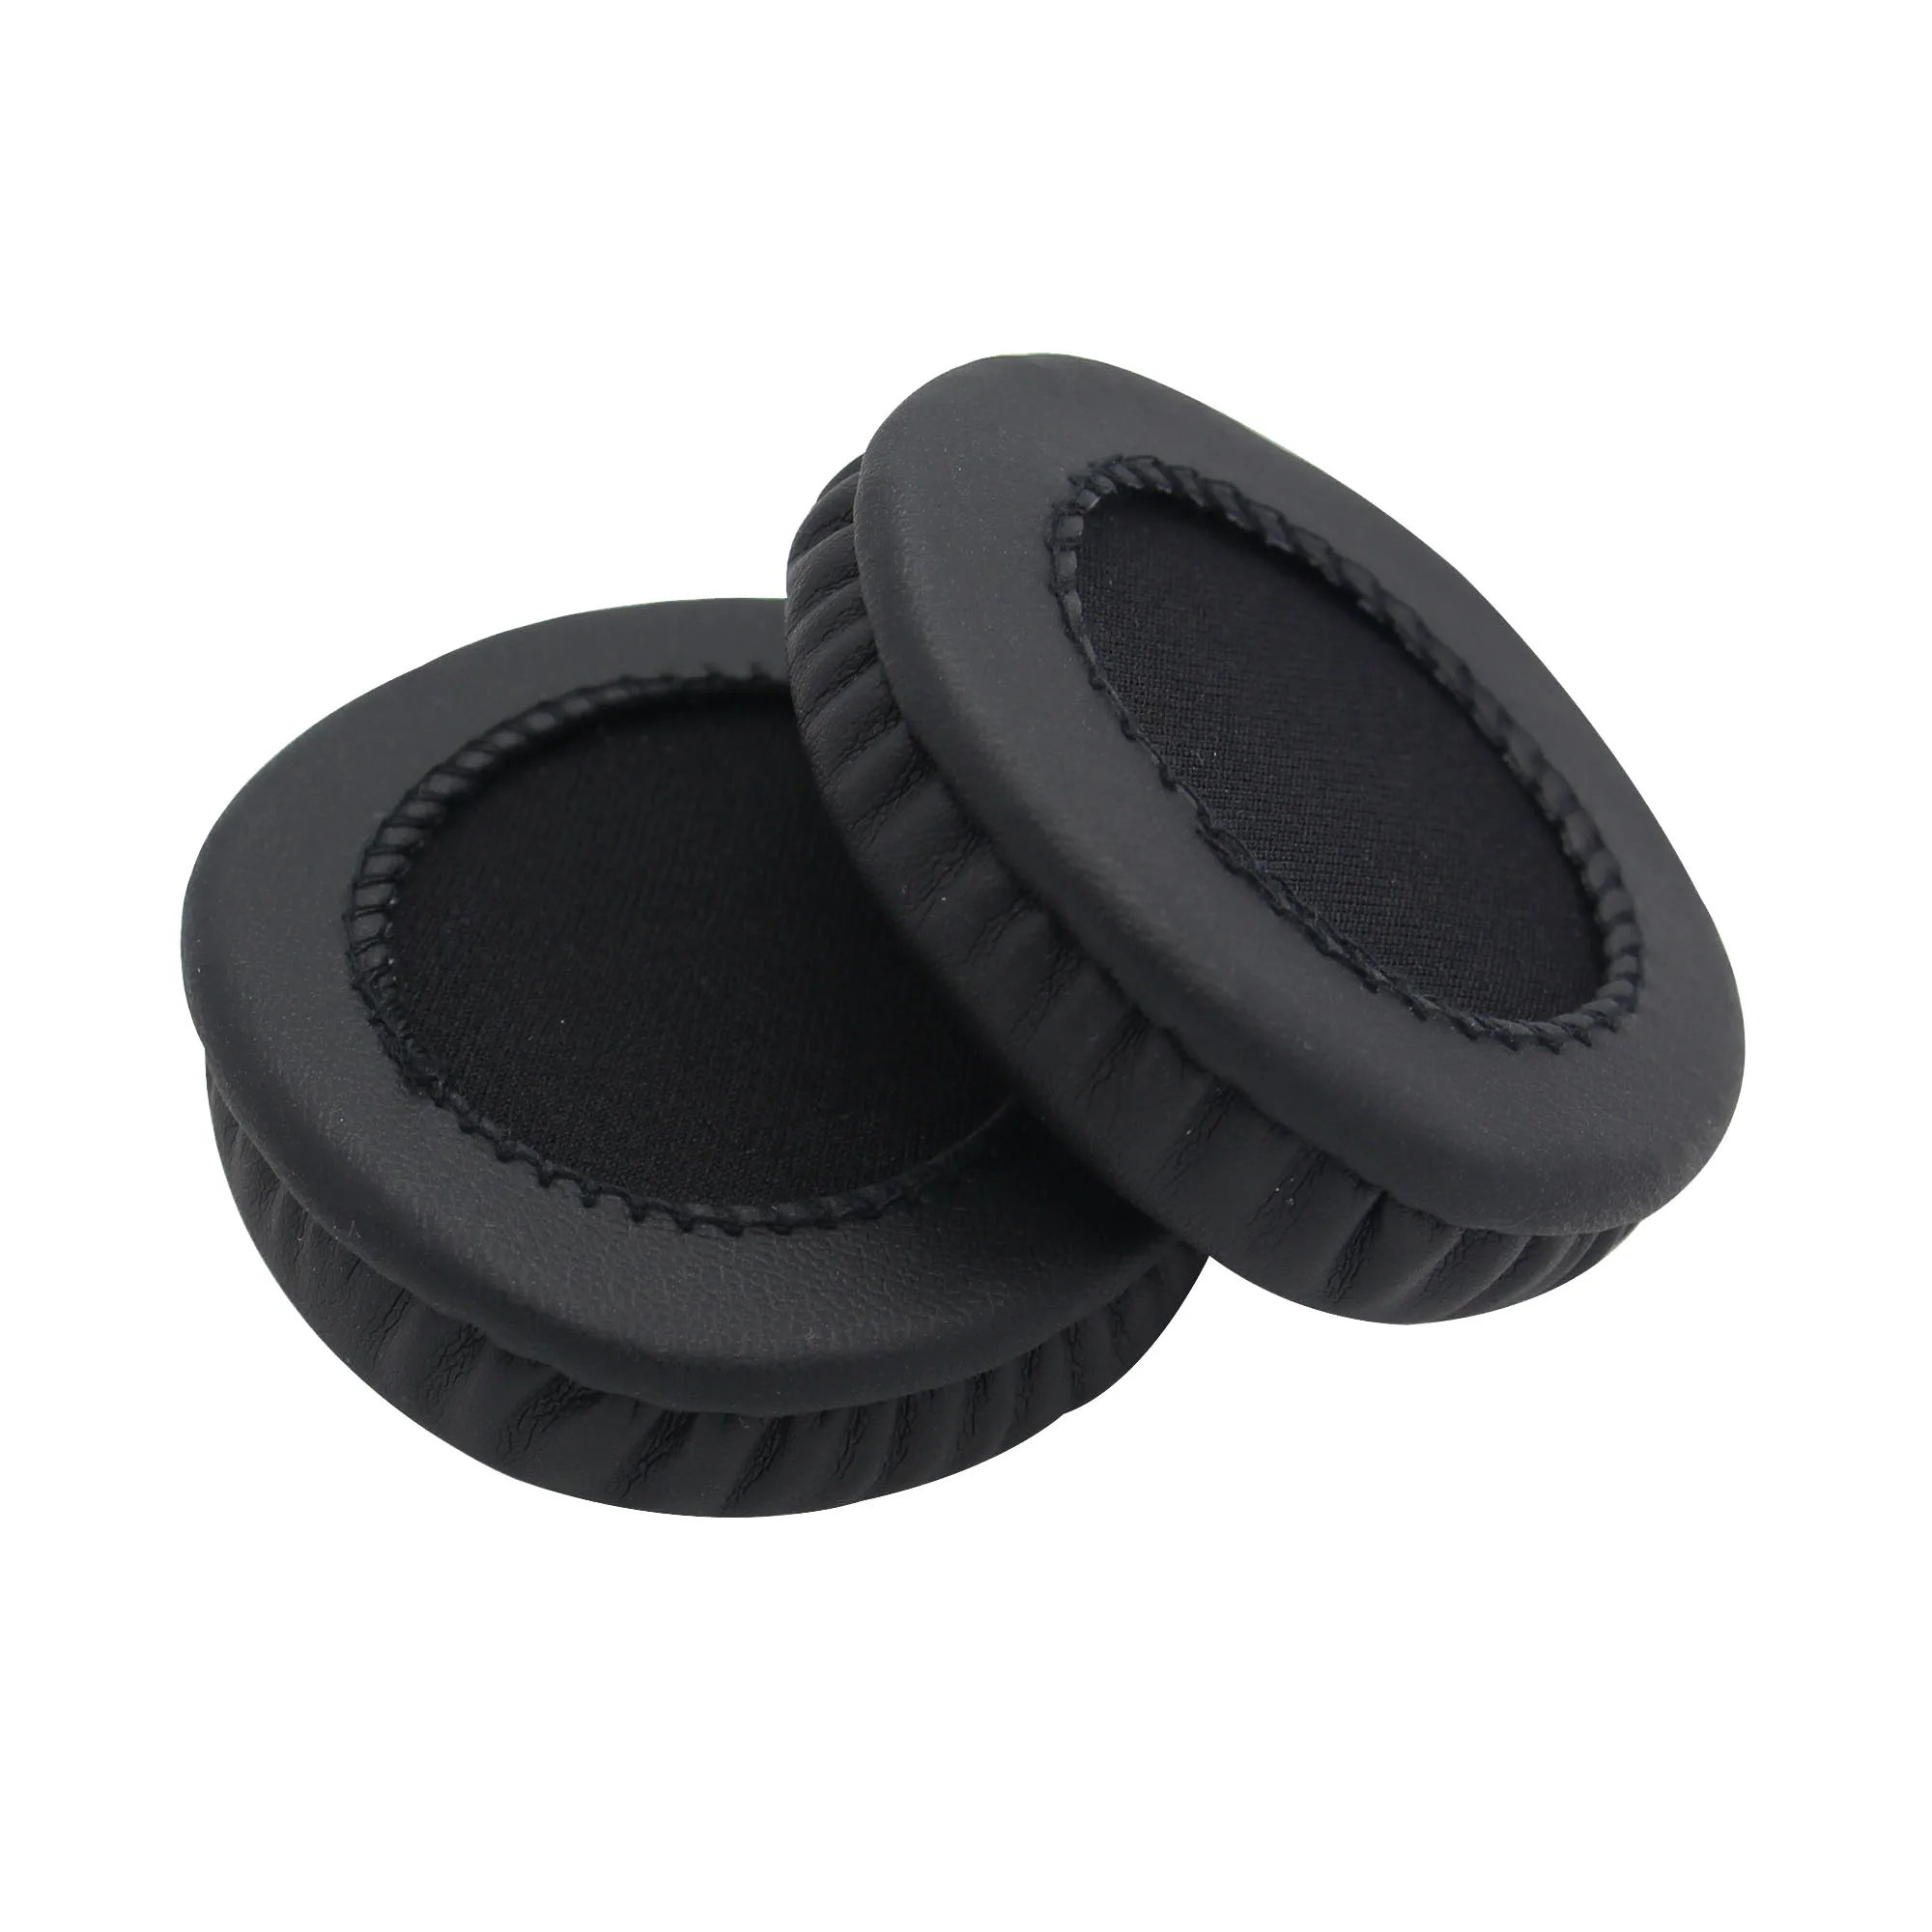 Whiyo 1 pair of Sleeve  for Jabra Evolve 64 Headphones Replacement Earpads Ear Pads Cover Pillow Cushion enlarge